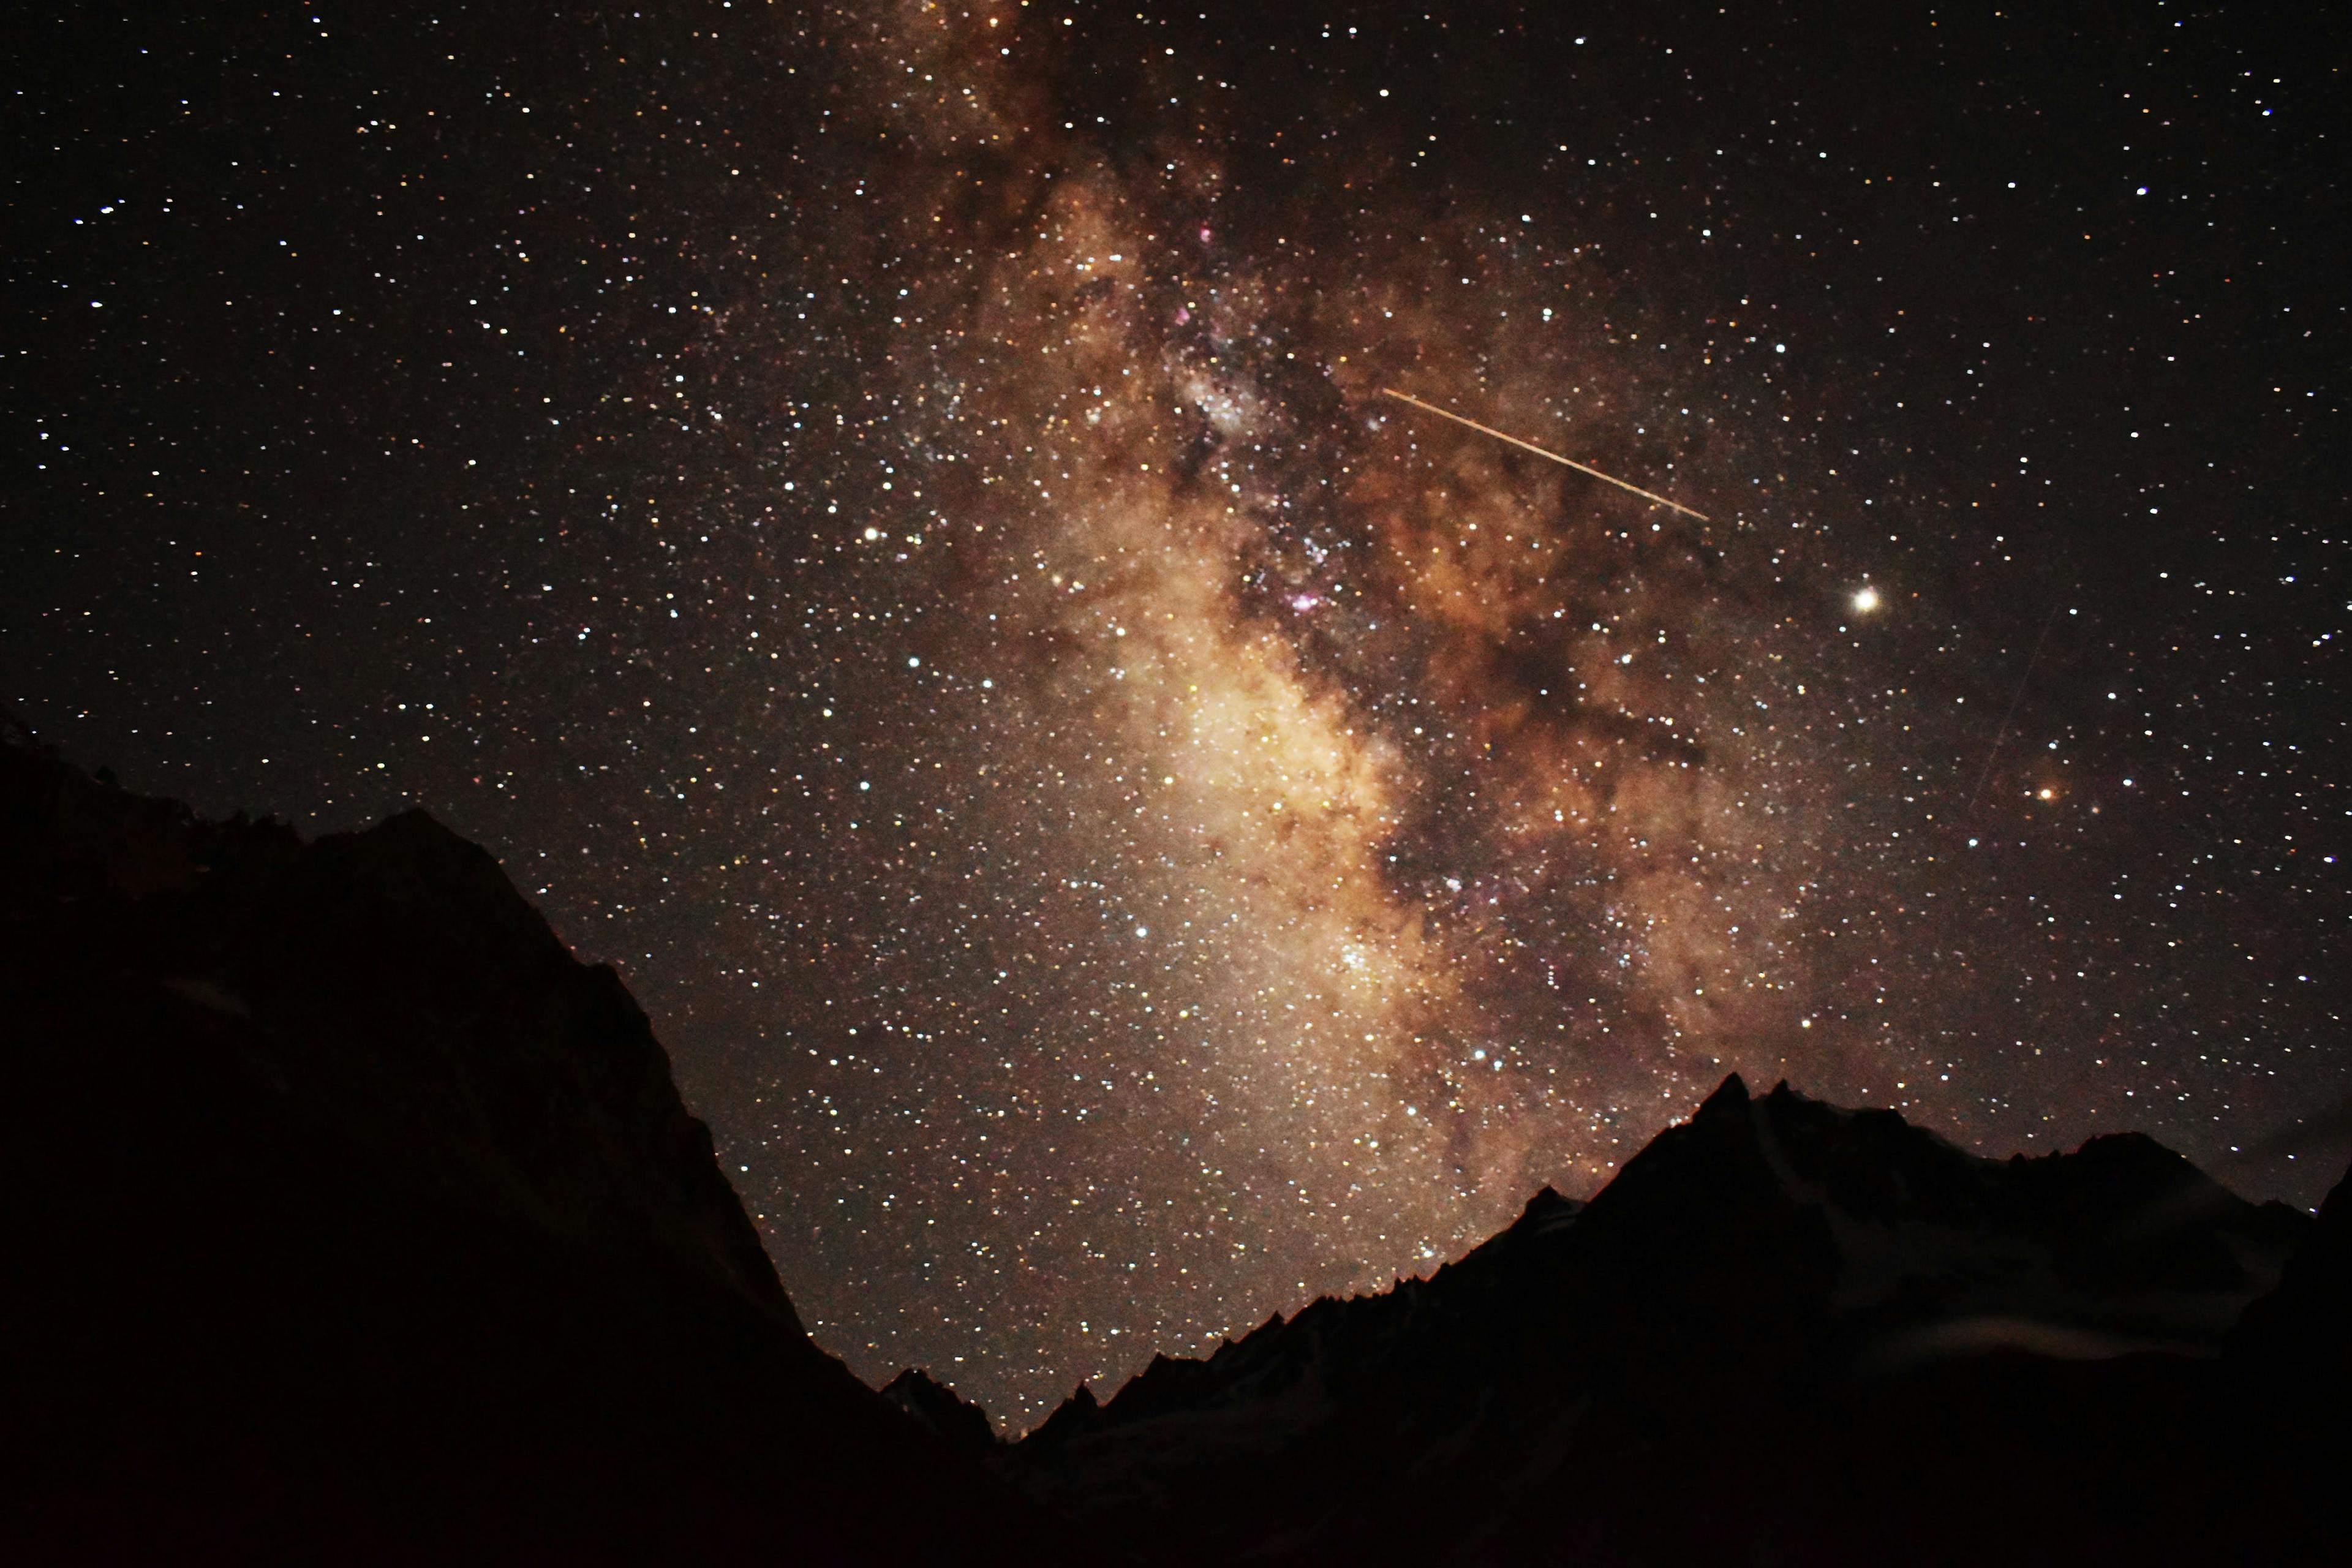 Stargazing in the himalayas